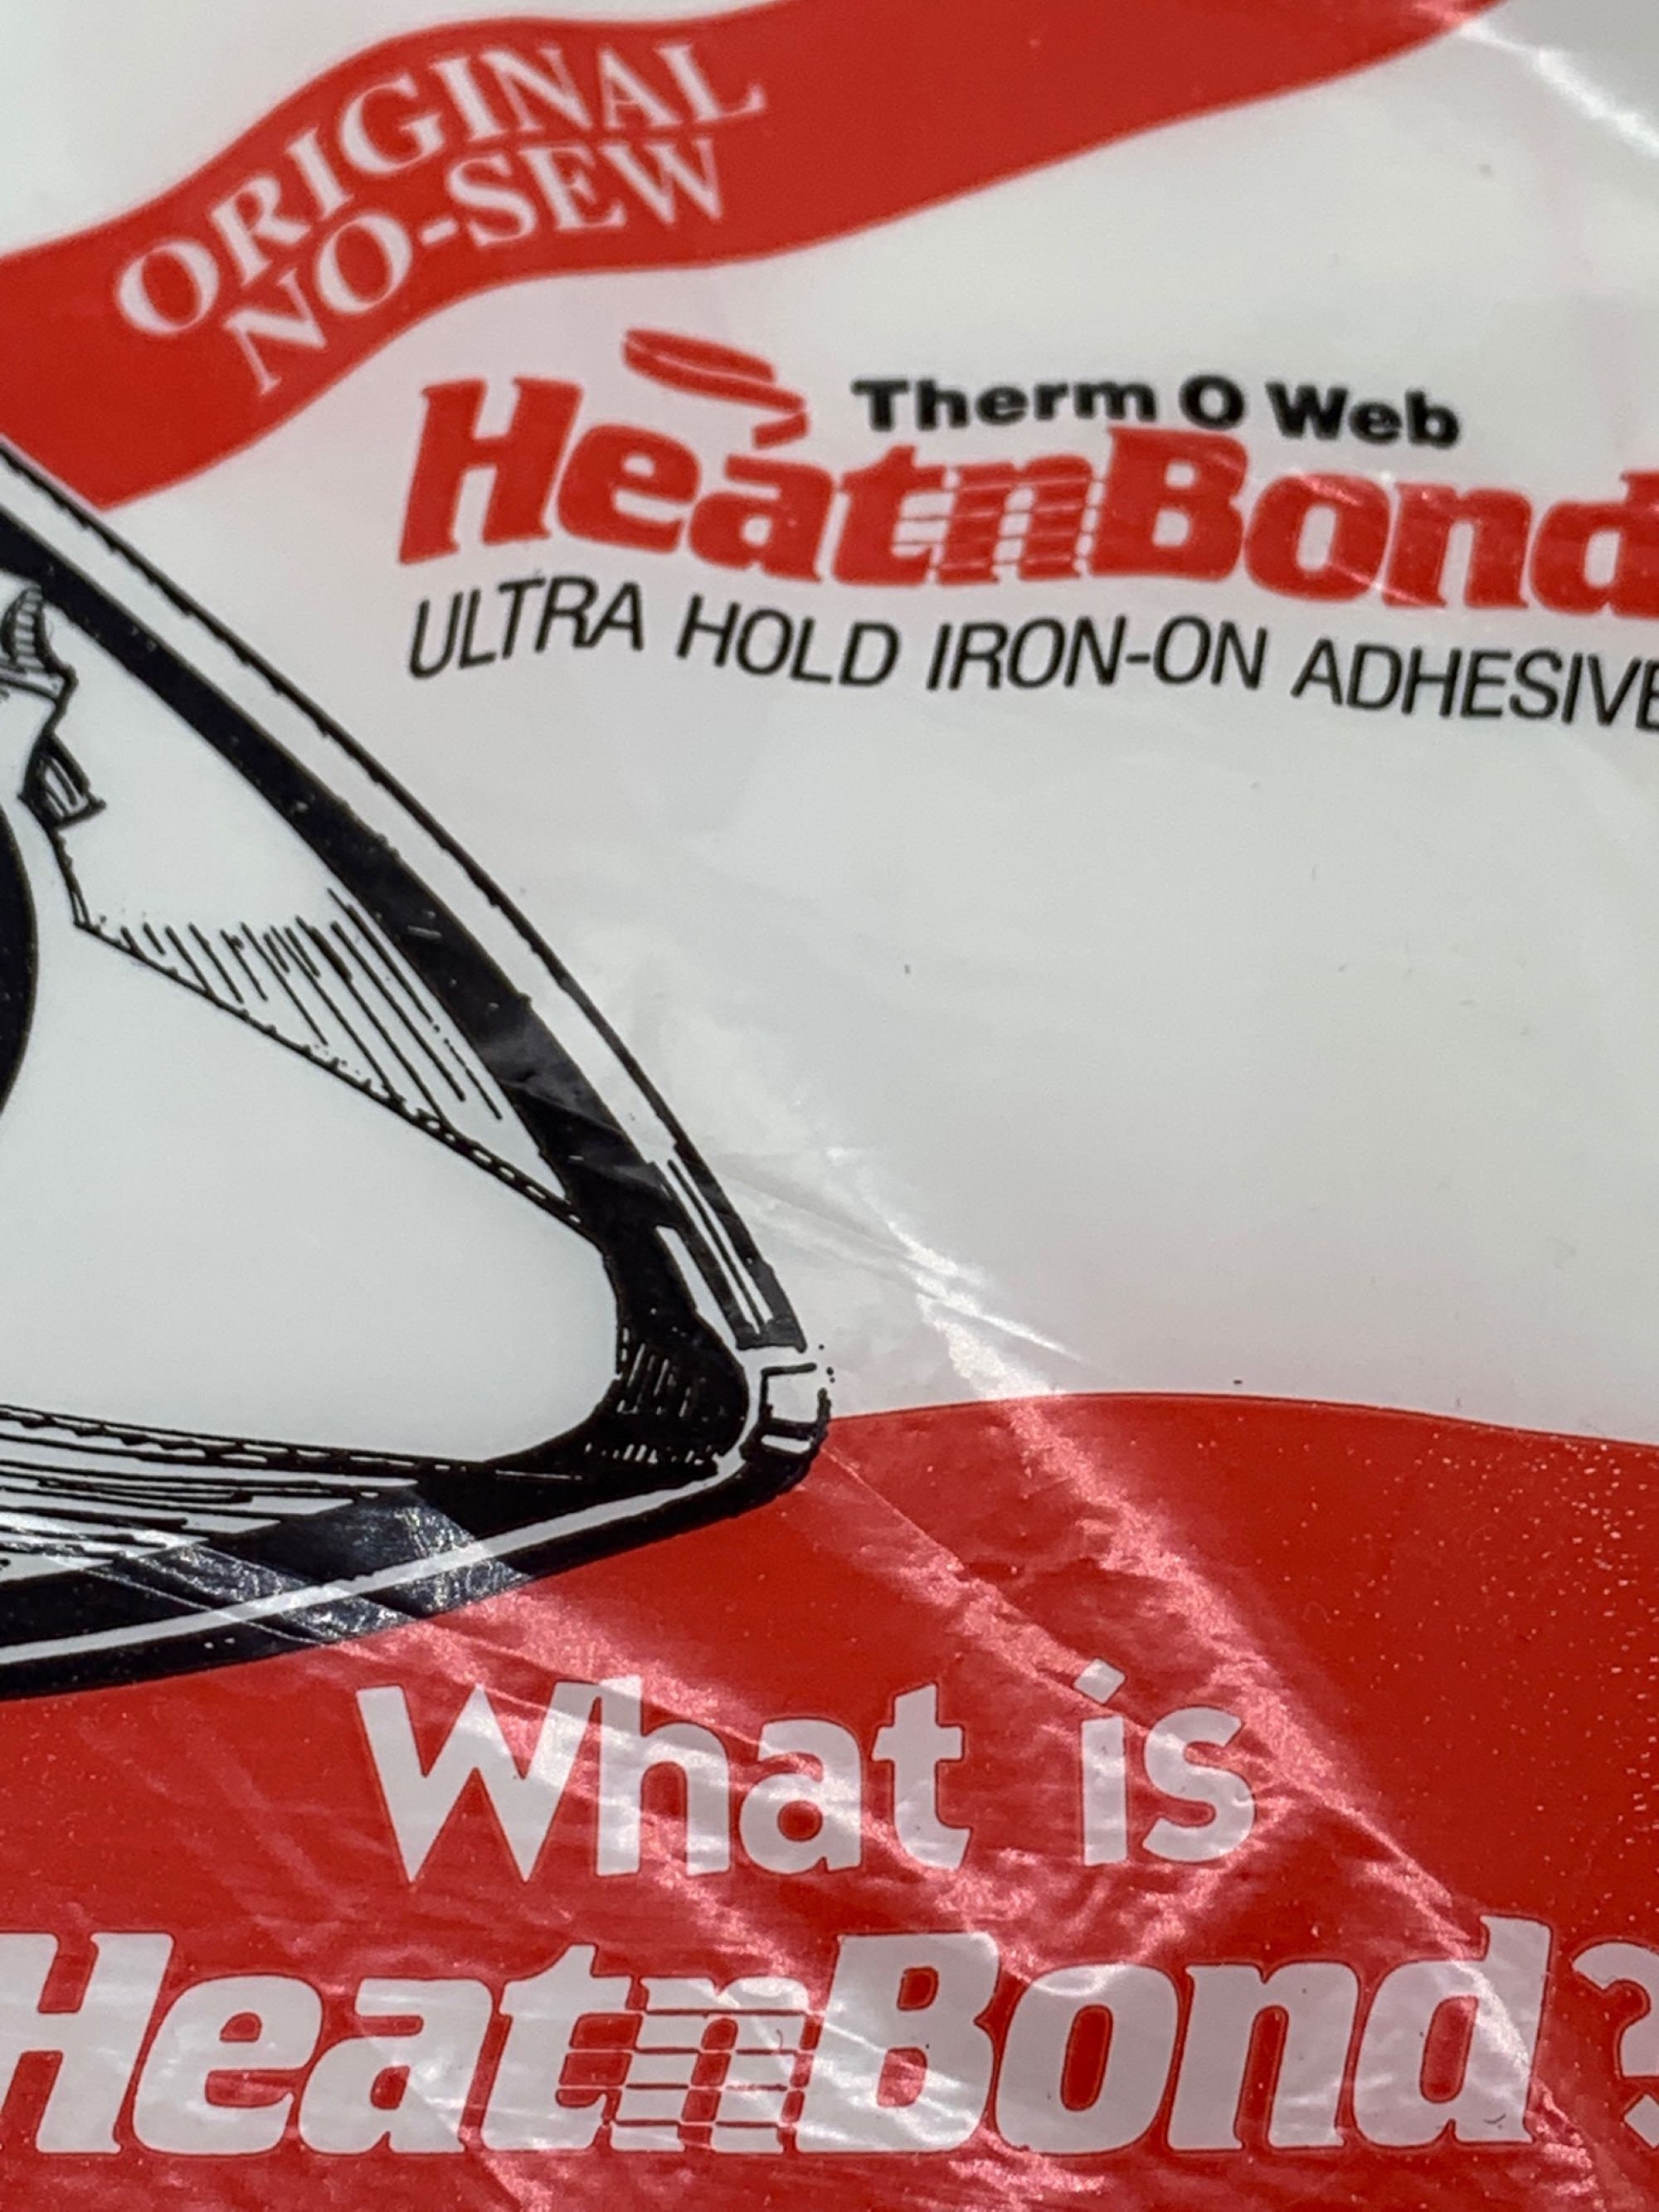 Therm-o-web HeatnBond Ultrahold Iron-On Adhesive 1 yd No Steam